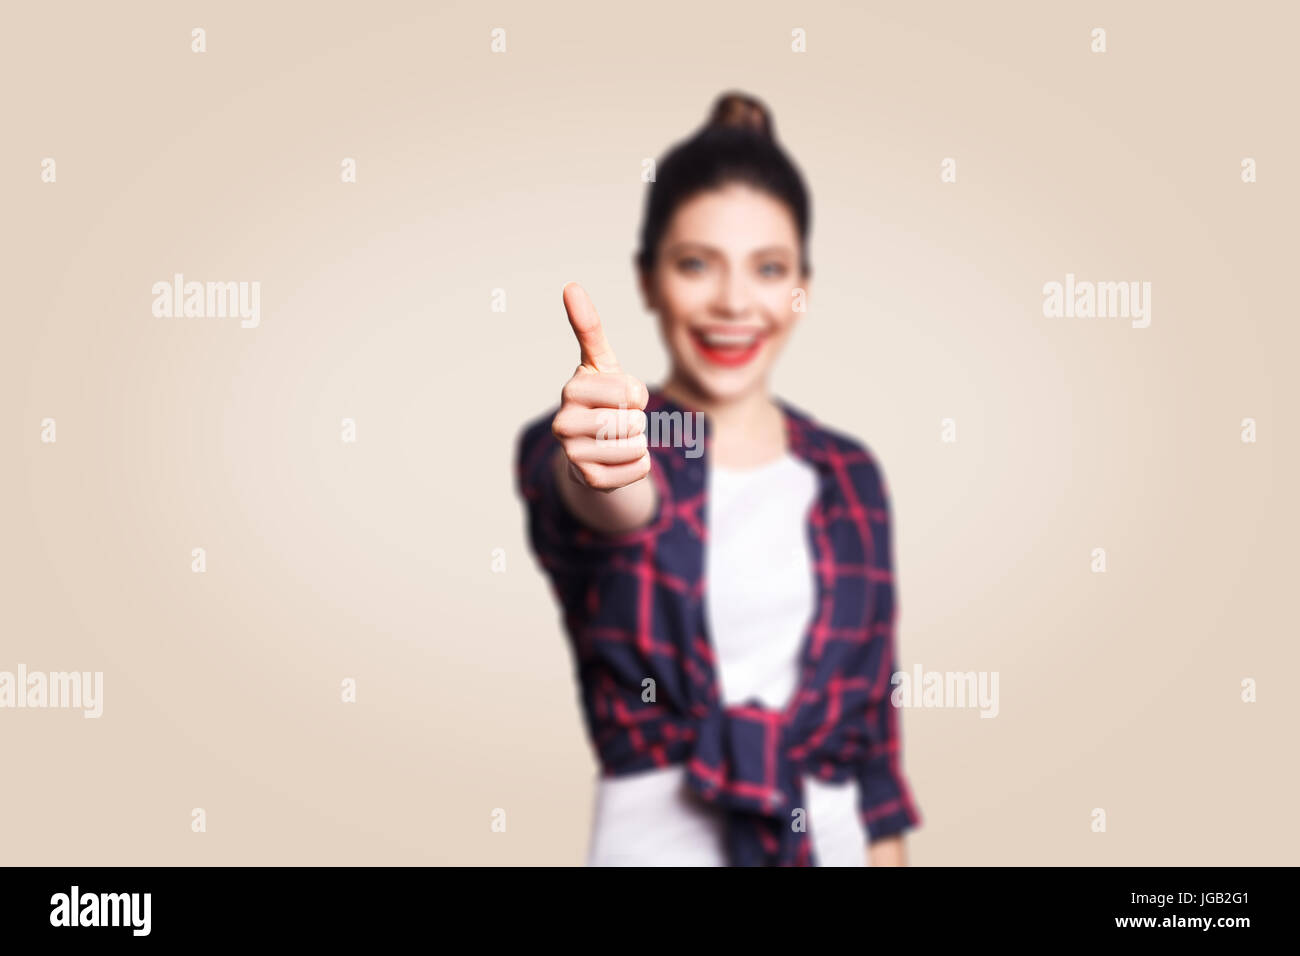 Young happy girl with casual style and bun hair thumbs up her finger, on beige blank wall with copy space looking at camera with toothy smile. focus o Stock Photo